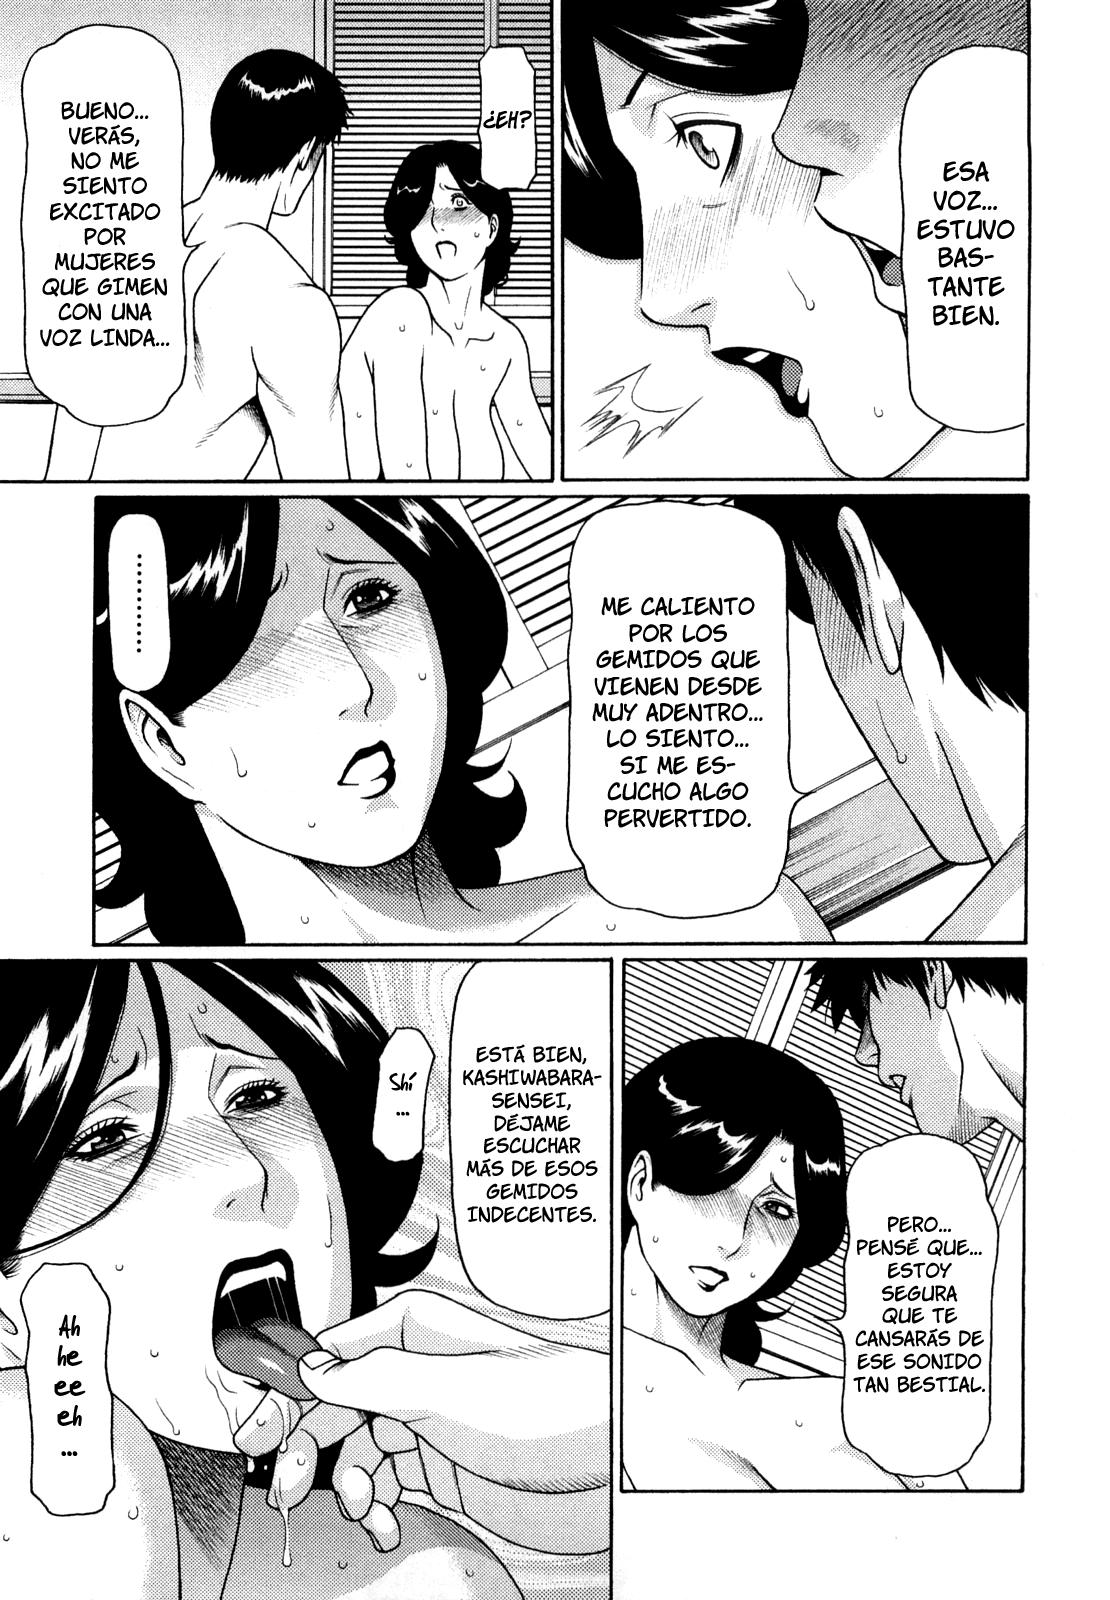 Immorality Love-Hole Completo (Sin Censura) Chapter-11 - 8